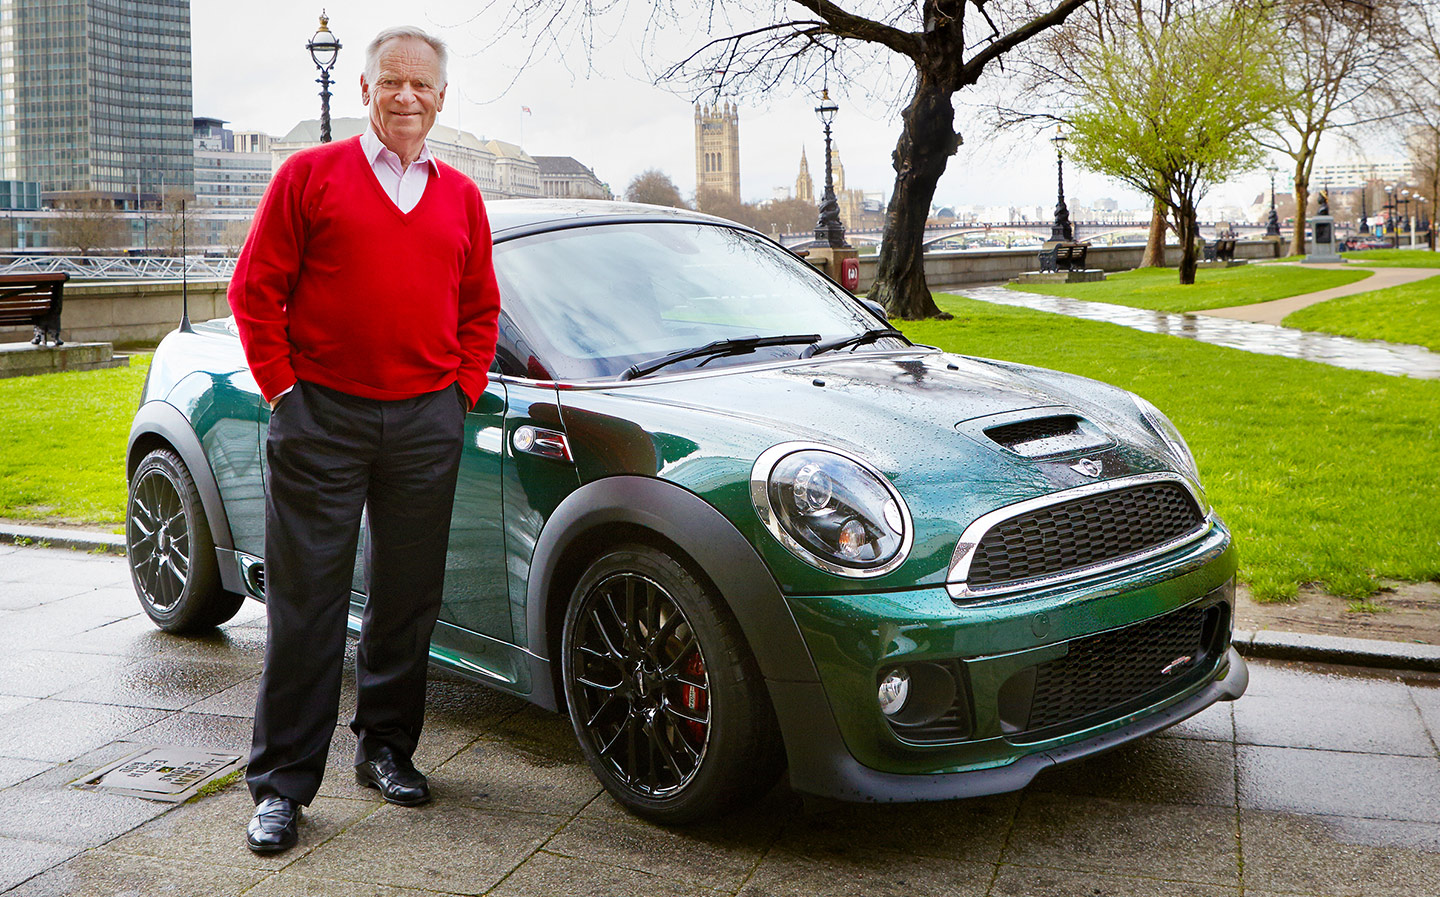 Me and My Motor: Jeffrey Archer, the former MP turned bestselling author